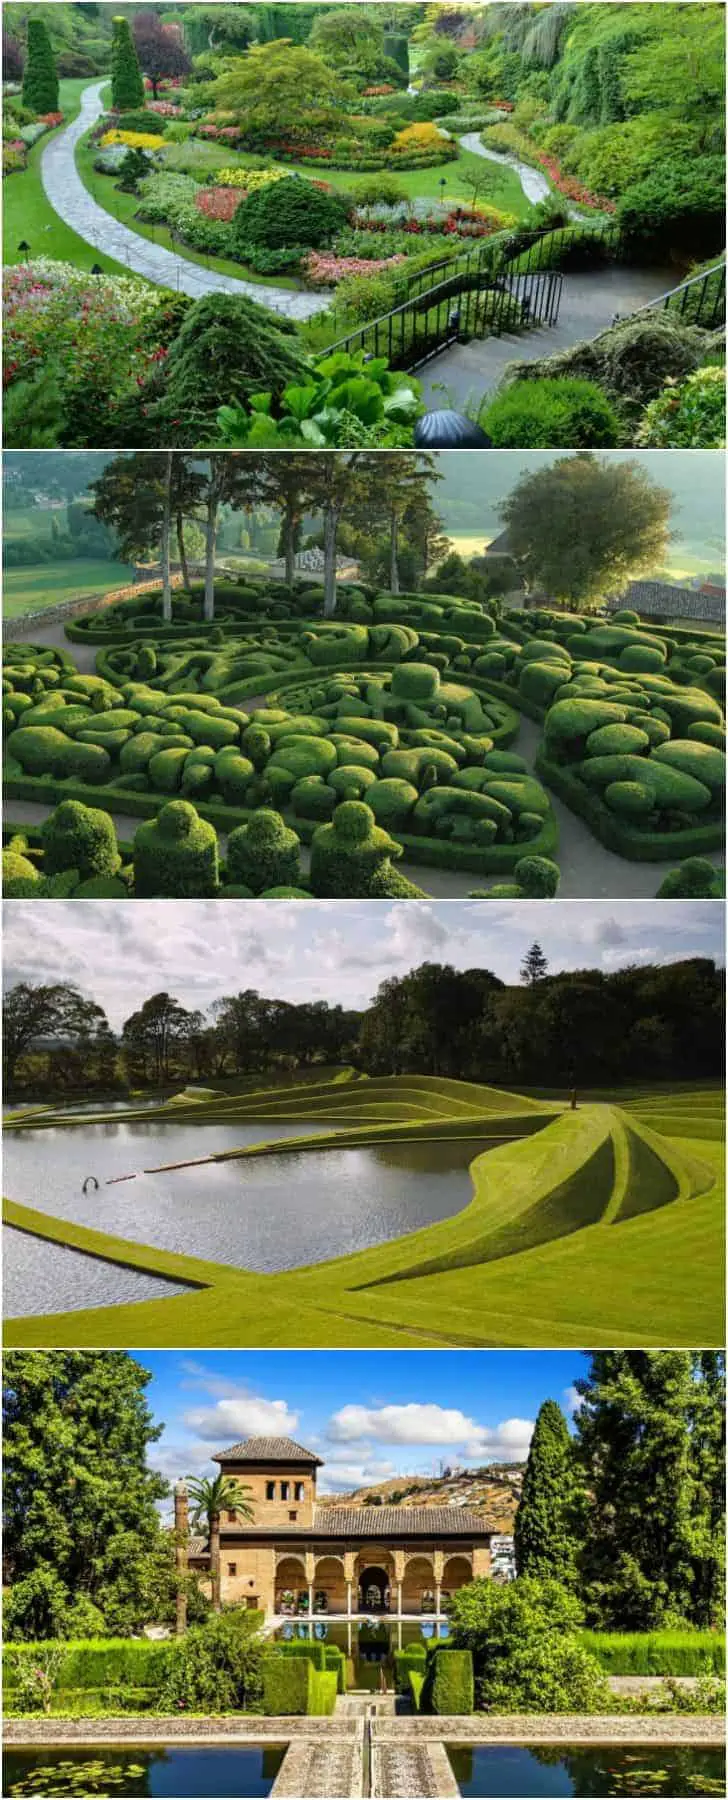 7 of the World's Most Beautiful Gardens Landscapes - 1001 Gardens on Beautiful Garden Landscape
 id=19678